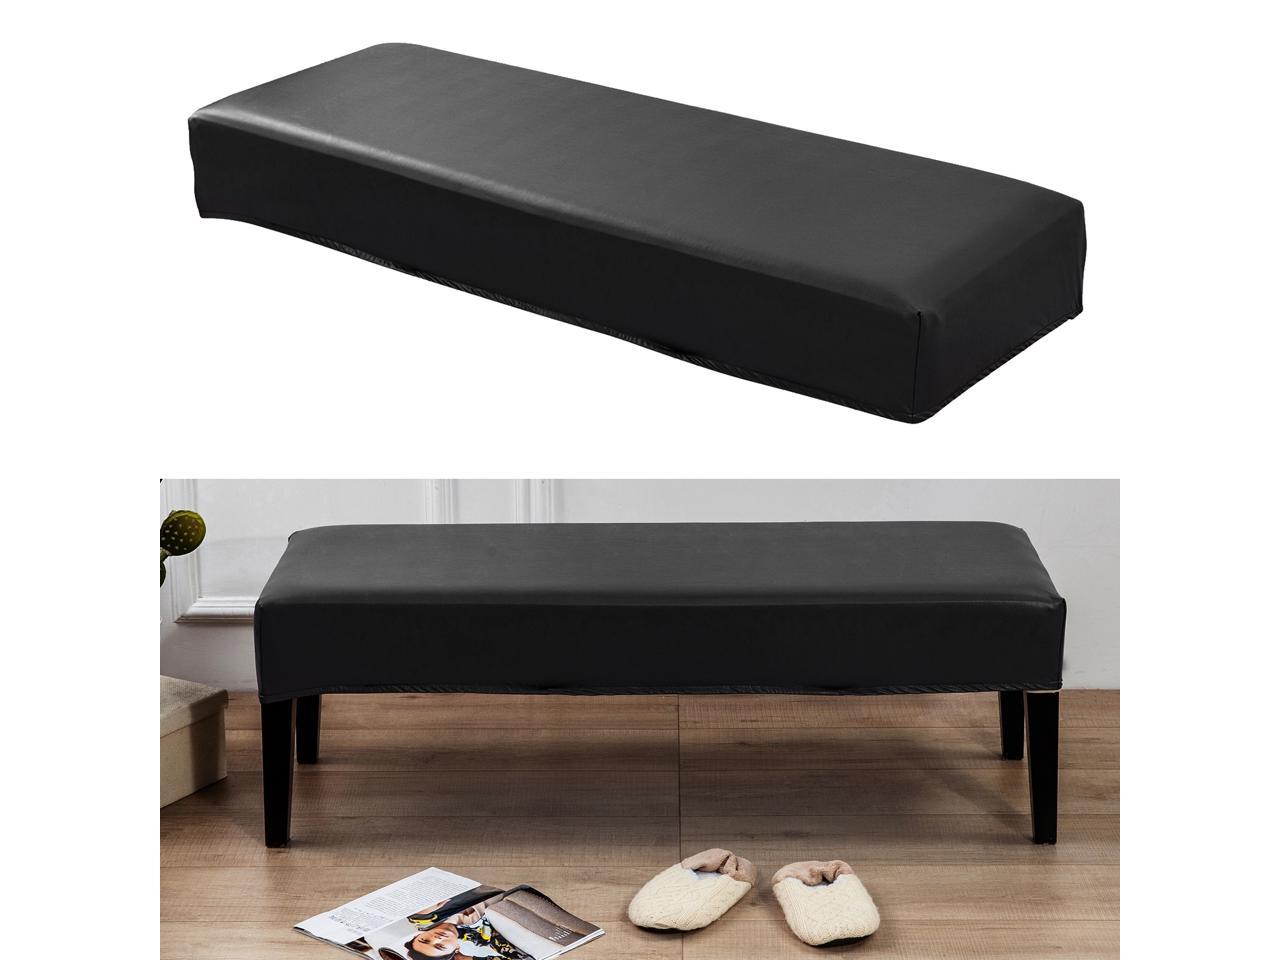 Details about   Dining Bench Cover Bedroom Elegant Long Seat Slipcover Furniture Protective Deco 